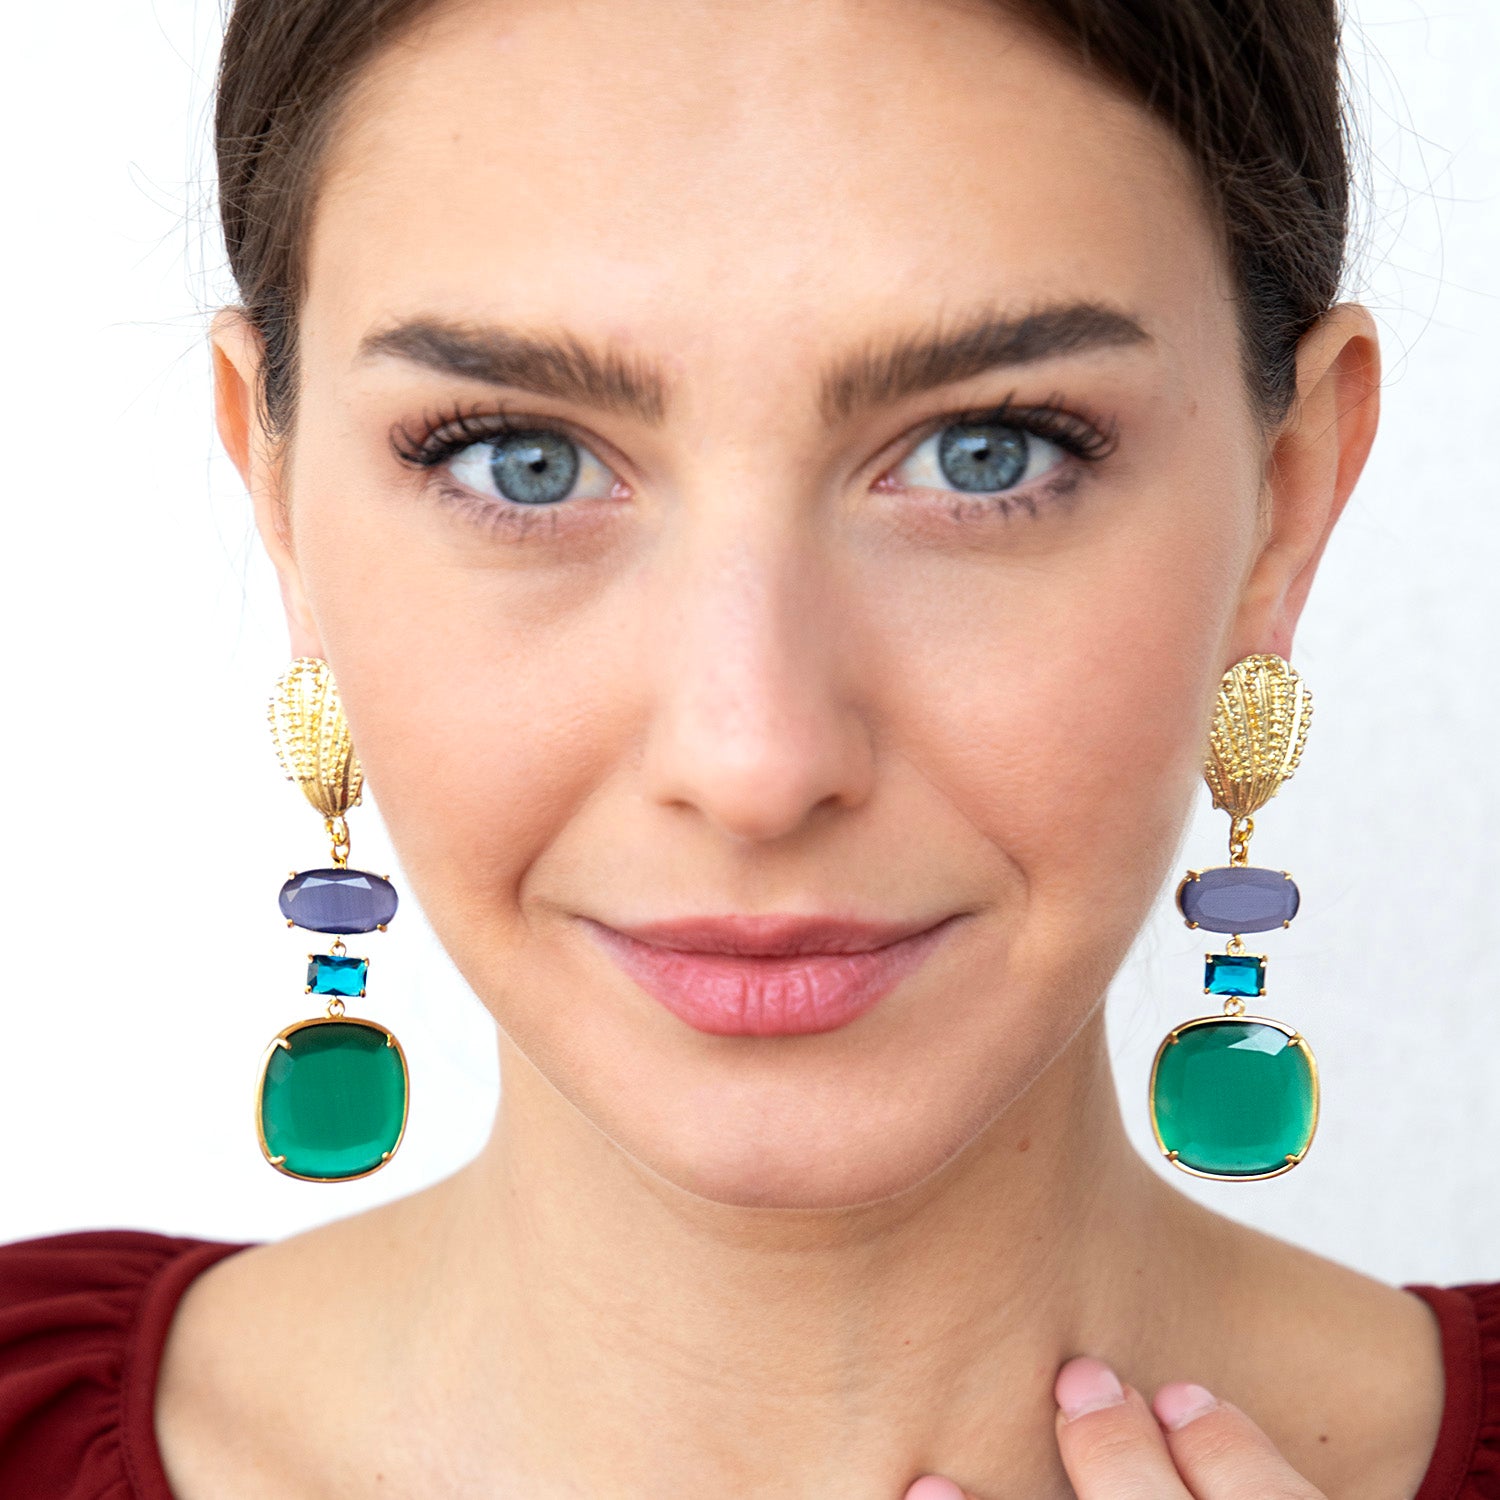 Katerina psoma dangle Earrings with faceted stones